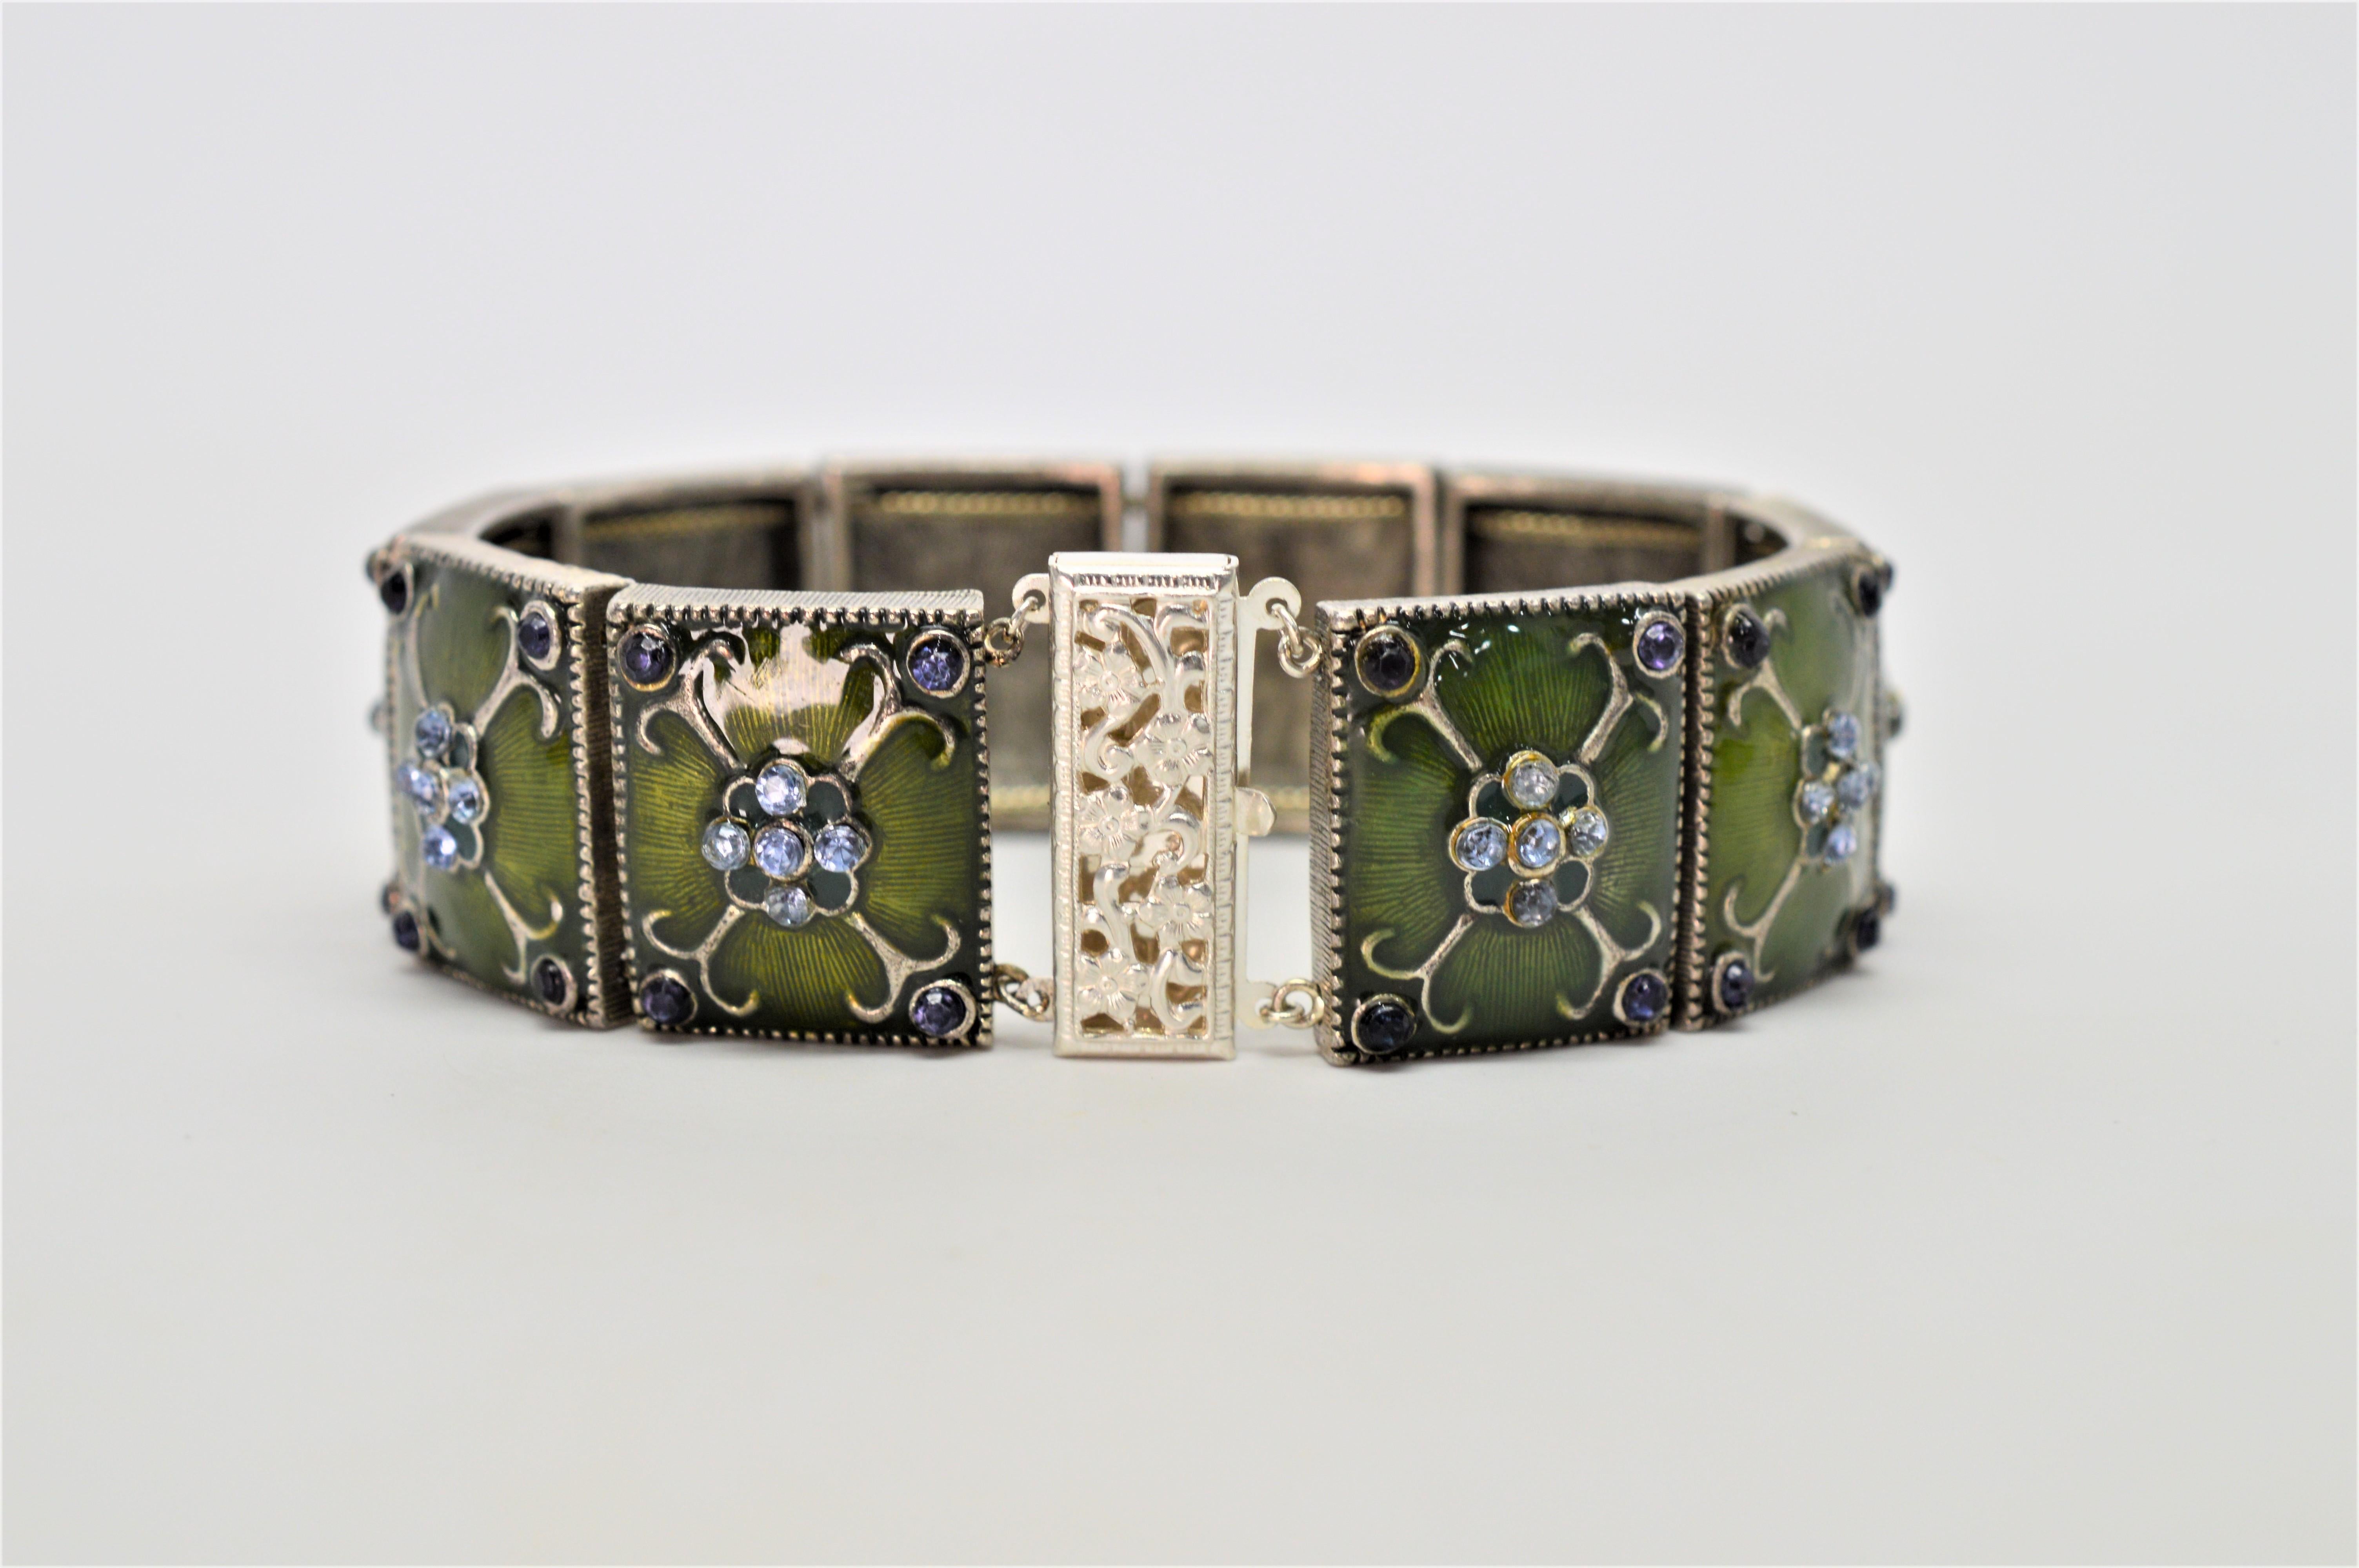 A distinct vintage piece, restored to its original vibrancy consisting of 10 moss green enamel base metal tiles linked to form this 7-1/2 inch bracelet.
Each tile link is artfully decorated with silver-tone scroll work accented with complimenting